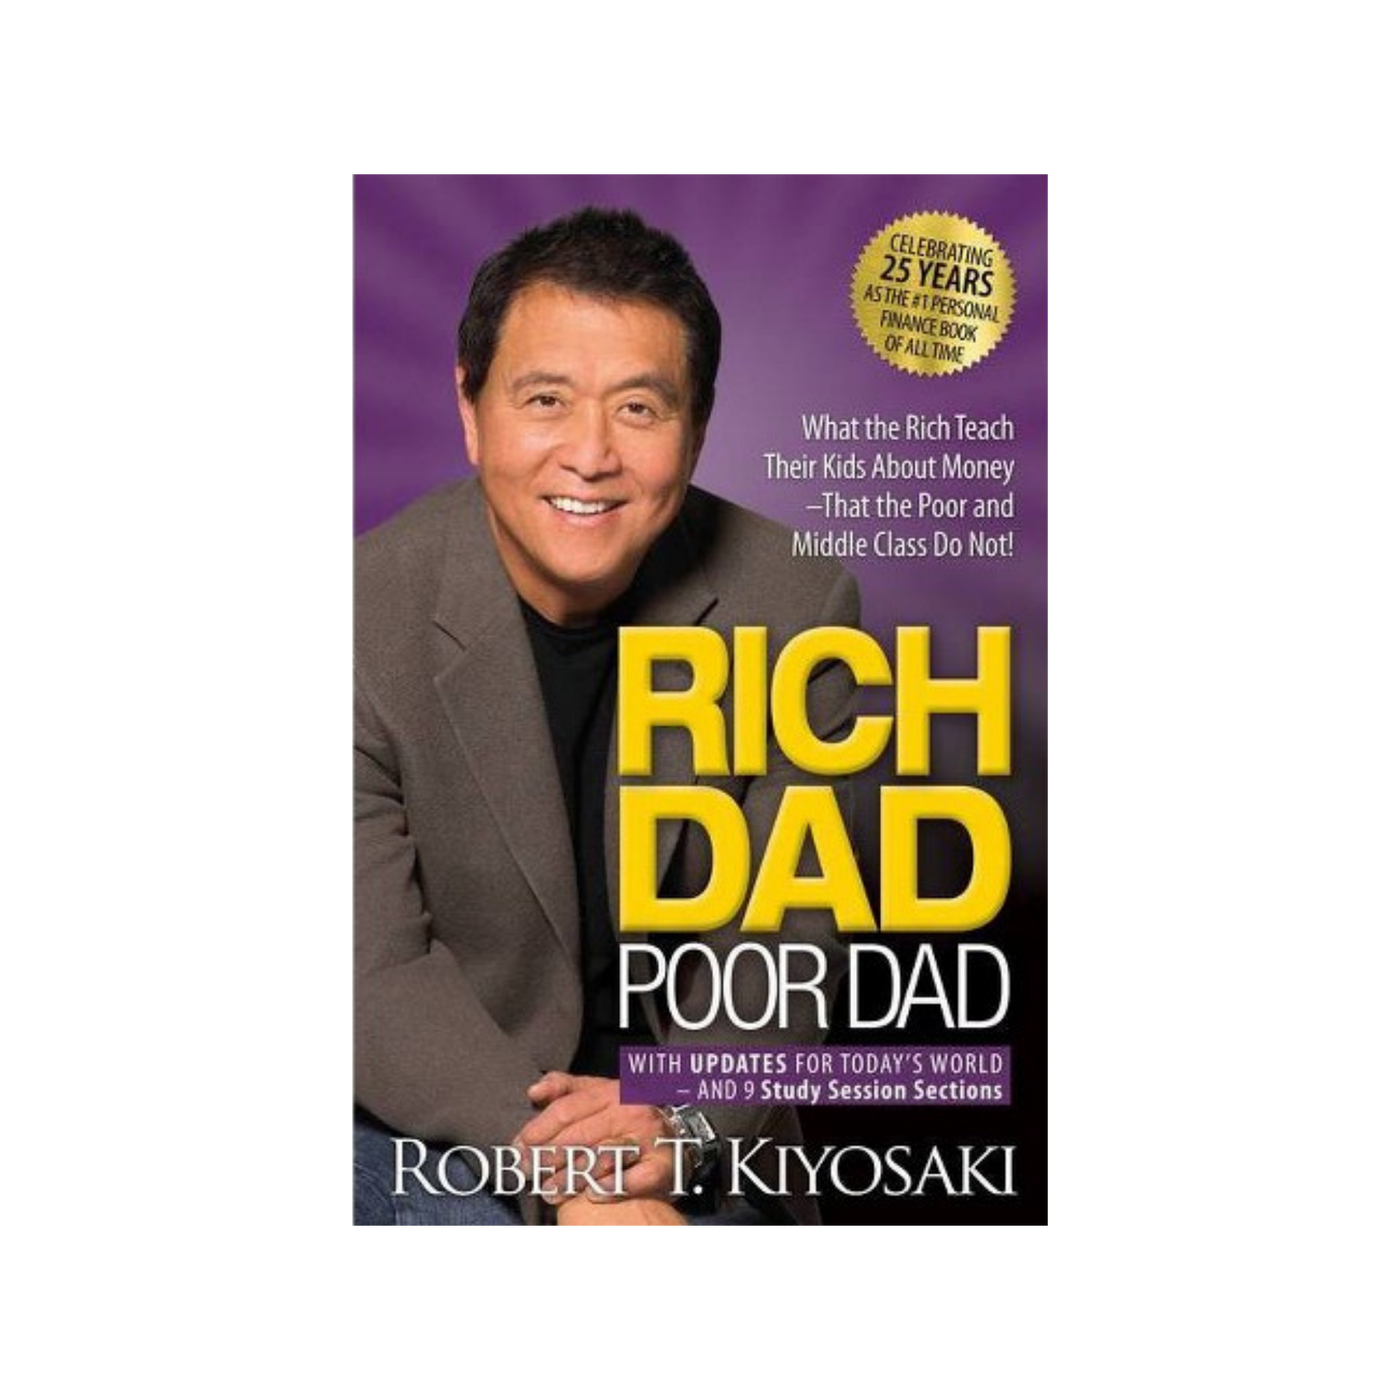 Rich Dad Poor Dad: What the Rich Teach Their Kids About Money That the Poor and Middle Class Do Not! by Robert Kiyosaki